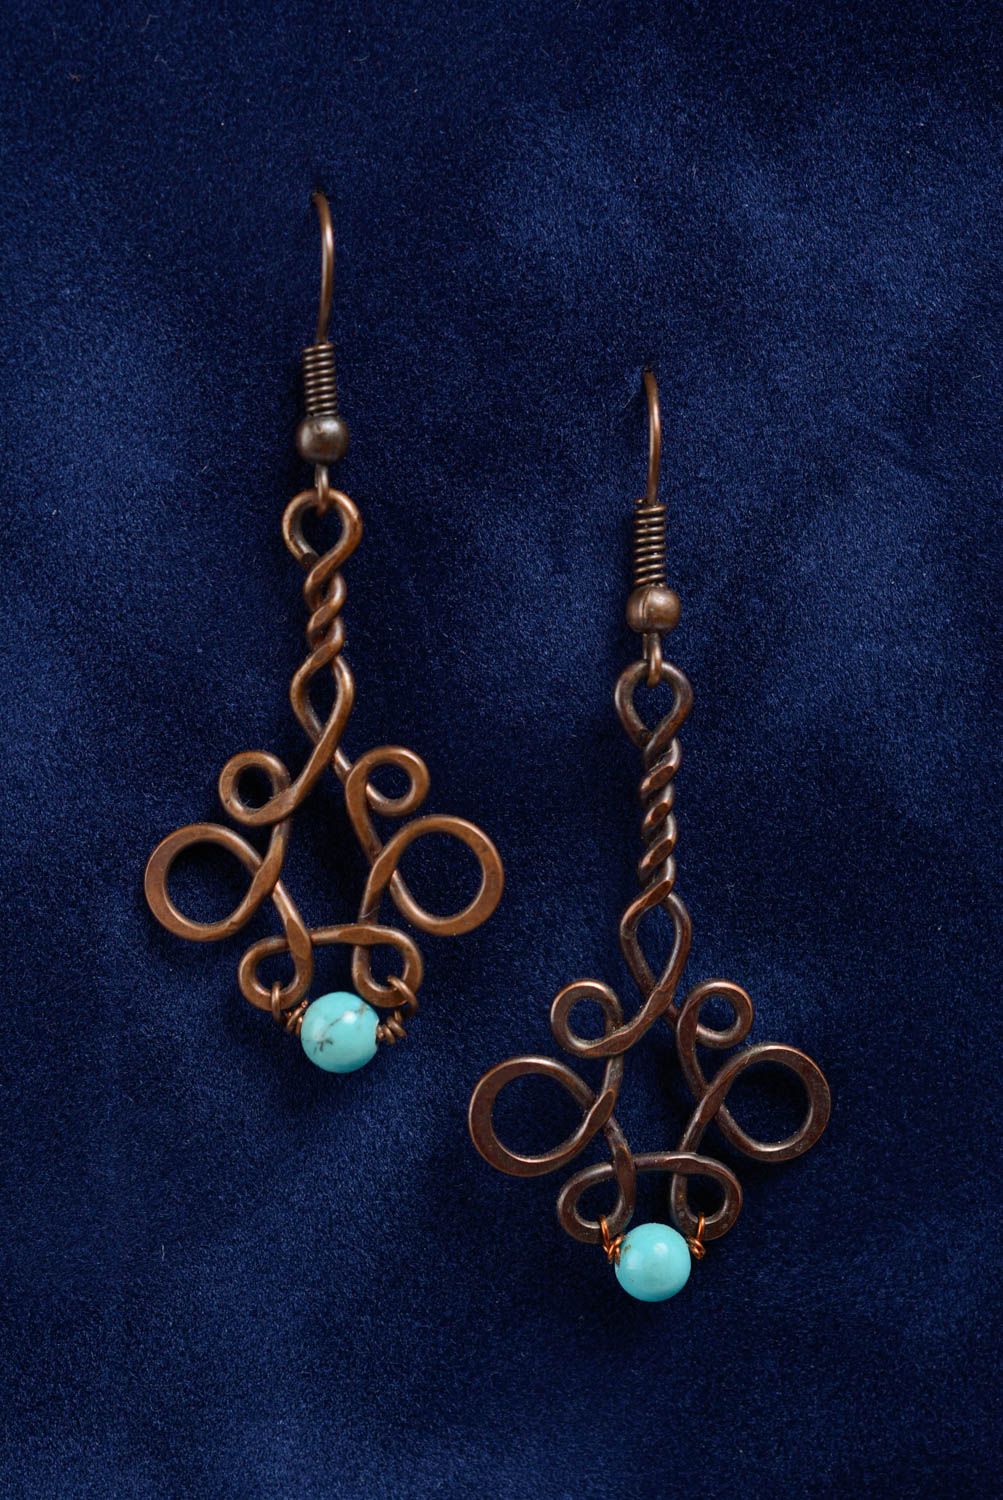 Big earrings made of copper using wire wrap technique with artificial turquoise photo 1